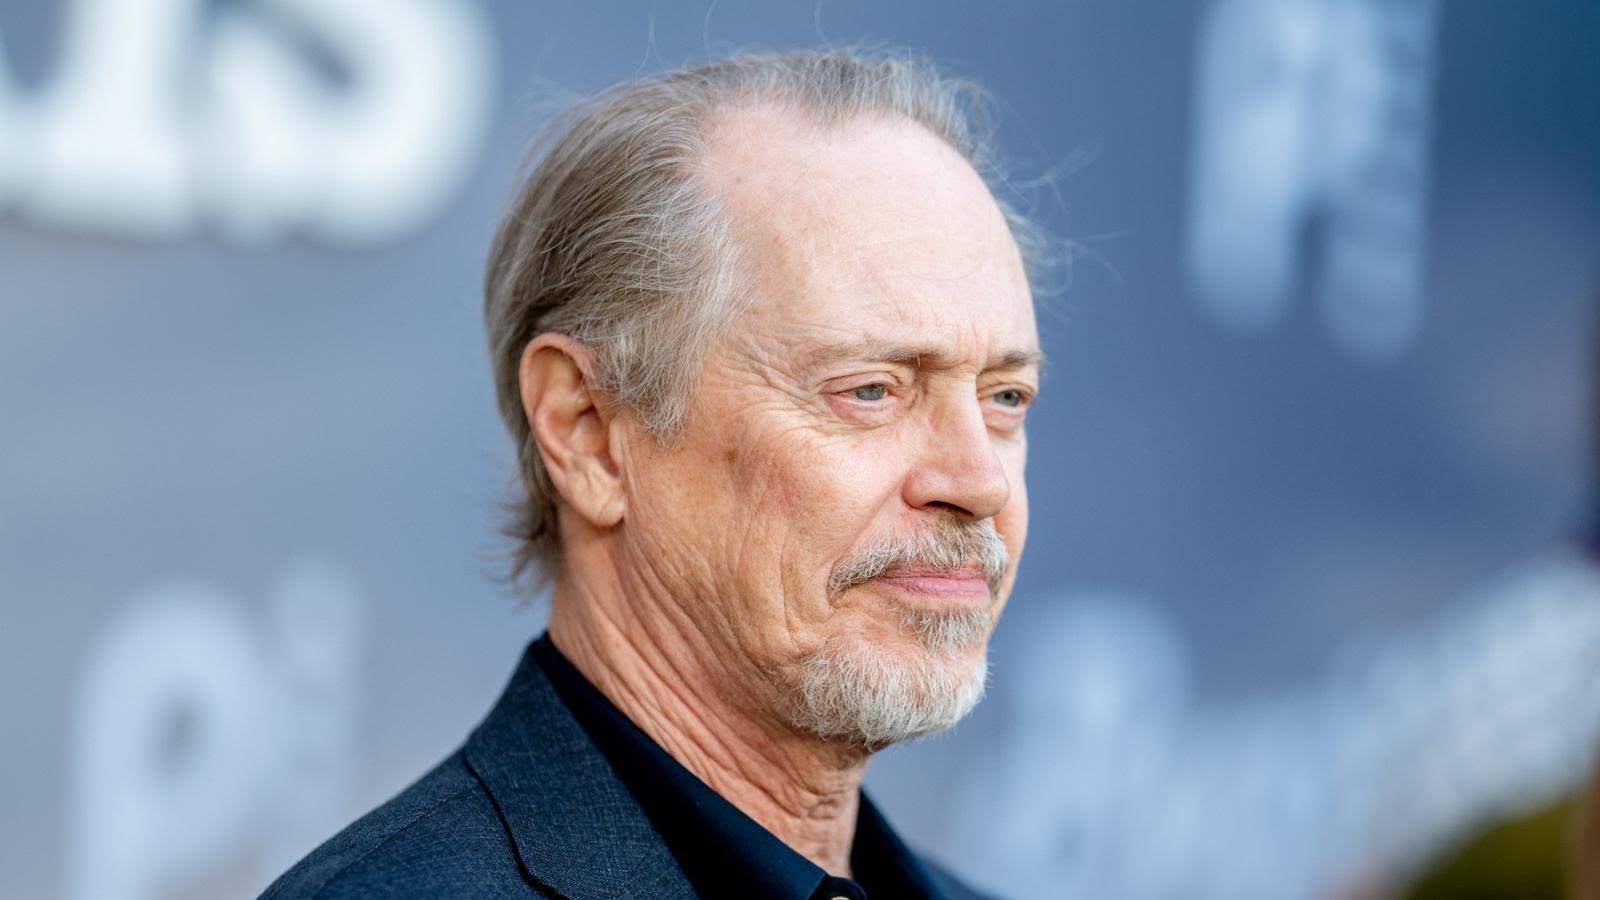 Steve Buscemi OK after being punched in face in NYC